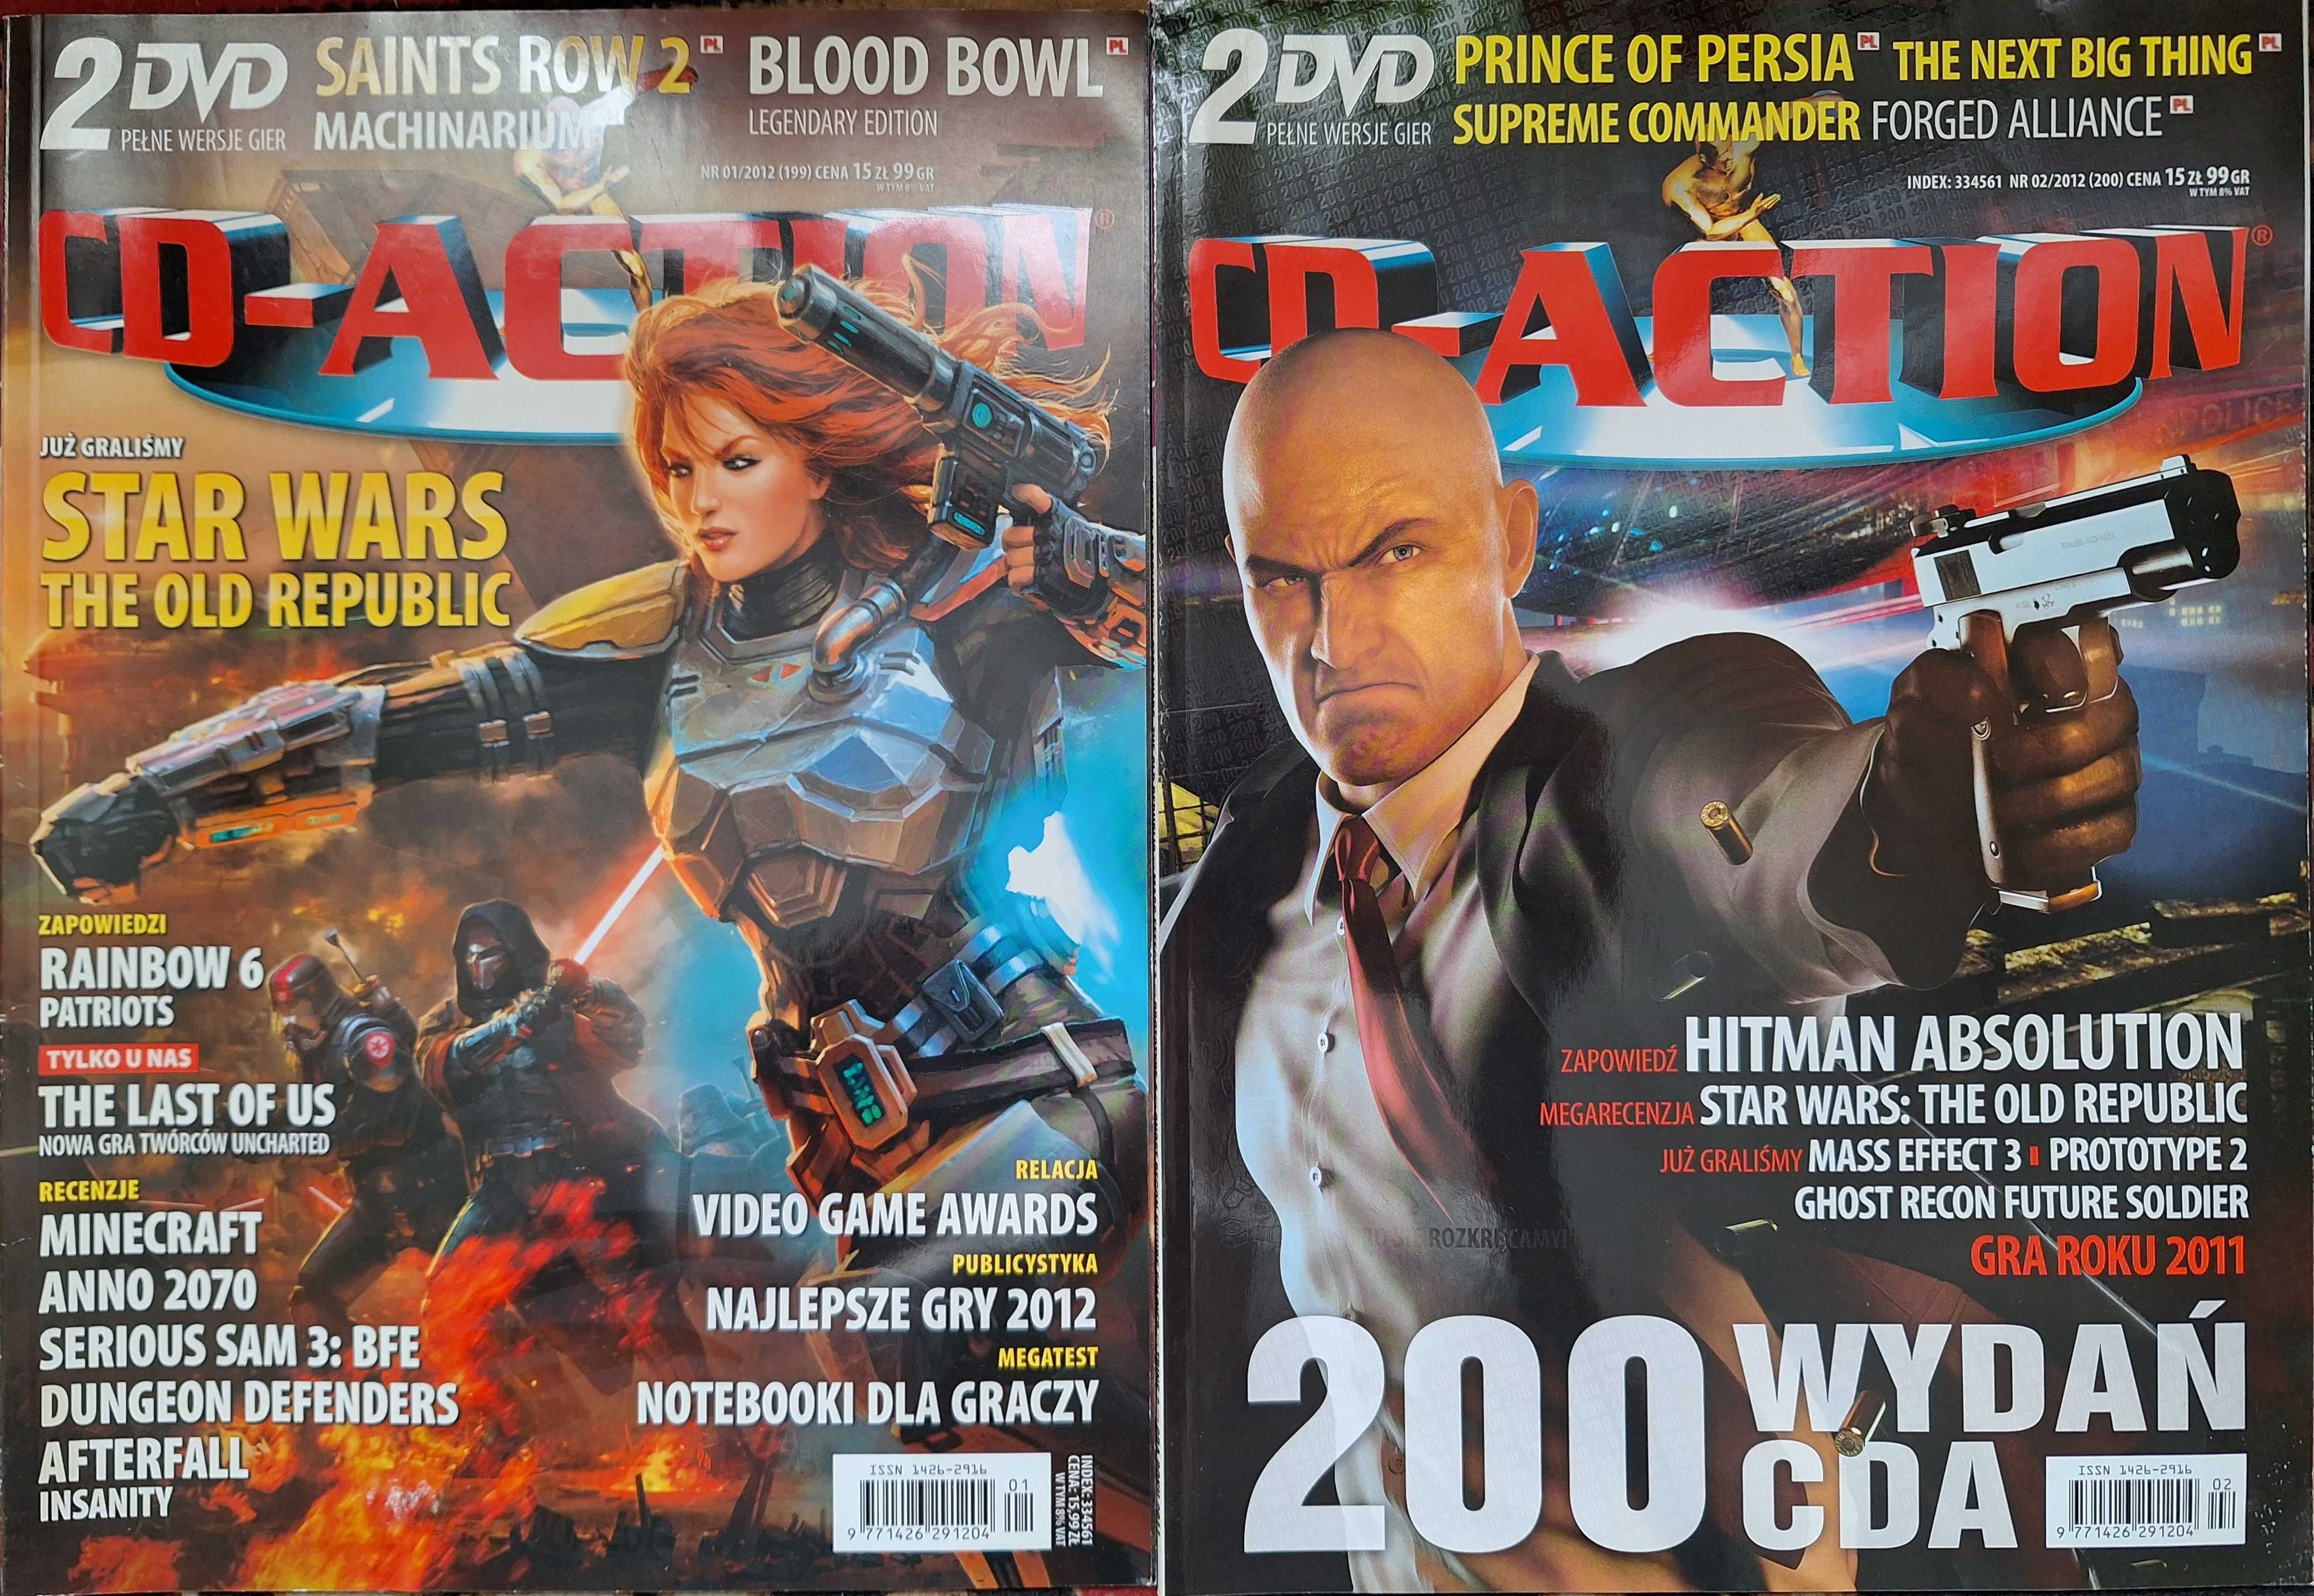 CD-Action 2012 x6